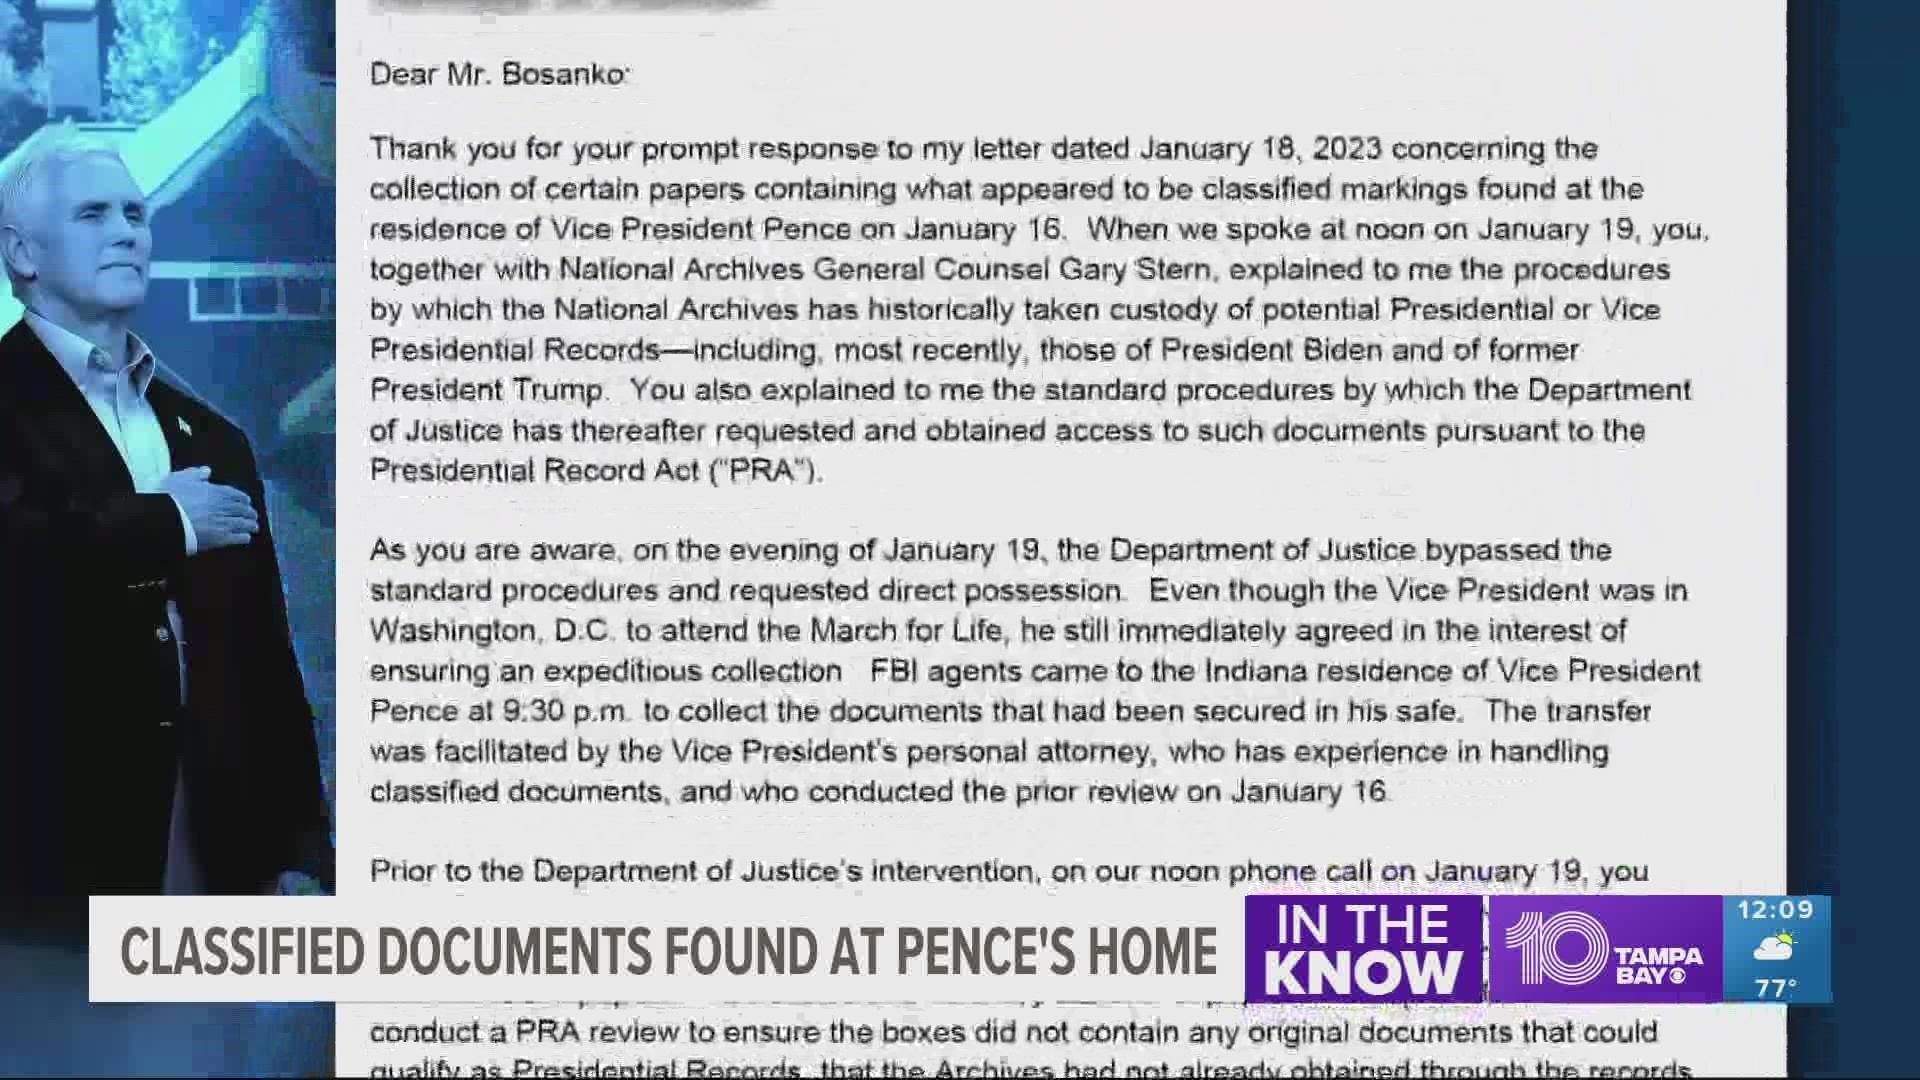 Lawyers for former Vice President Mike Pence said a “small number” of classified documents were found at his home in Indiana last week.